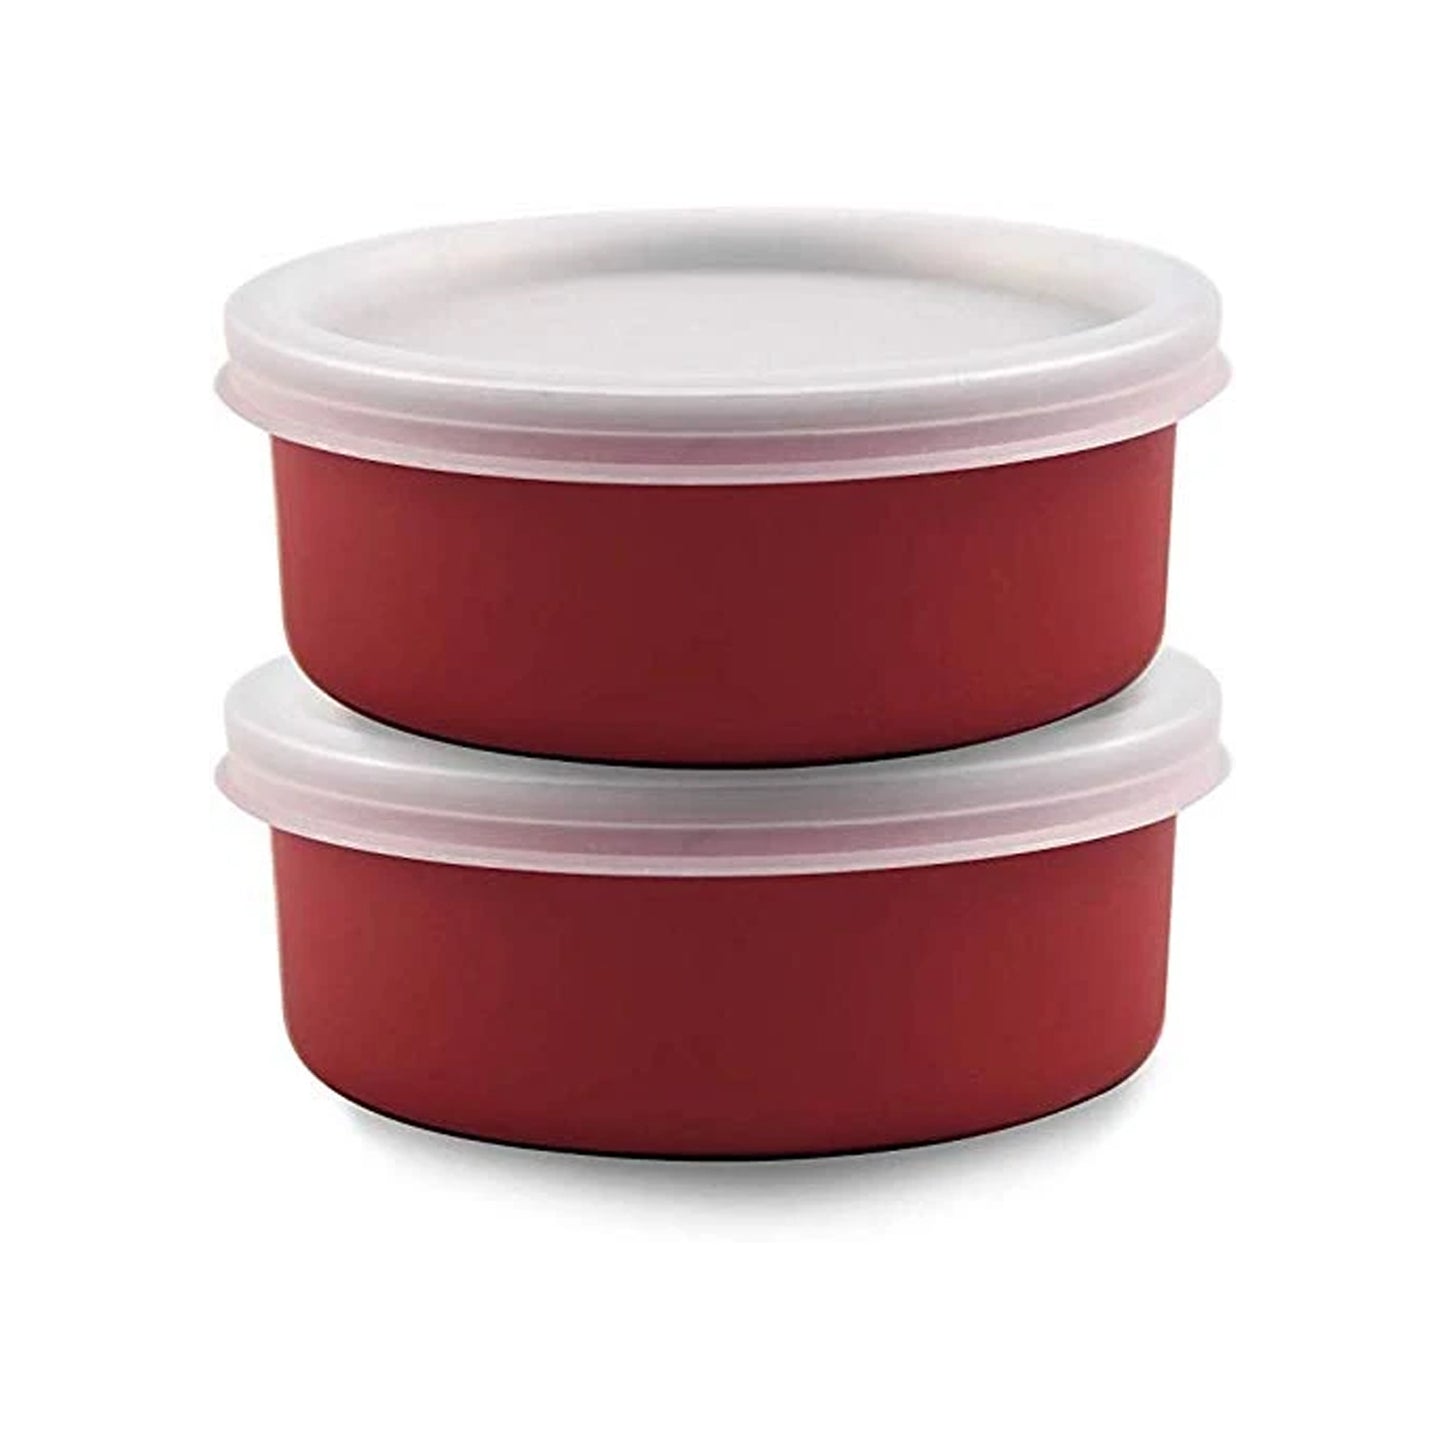 SWHF Microwave Safe Stainless Steel Tiffin/Lunch Box Set,Red (Pack of 2)